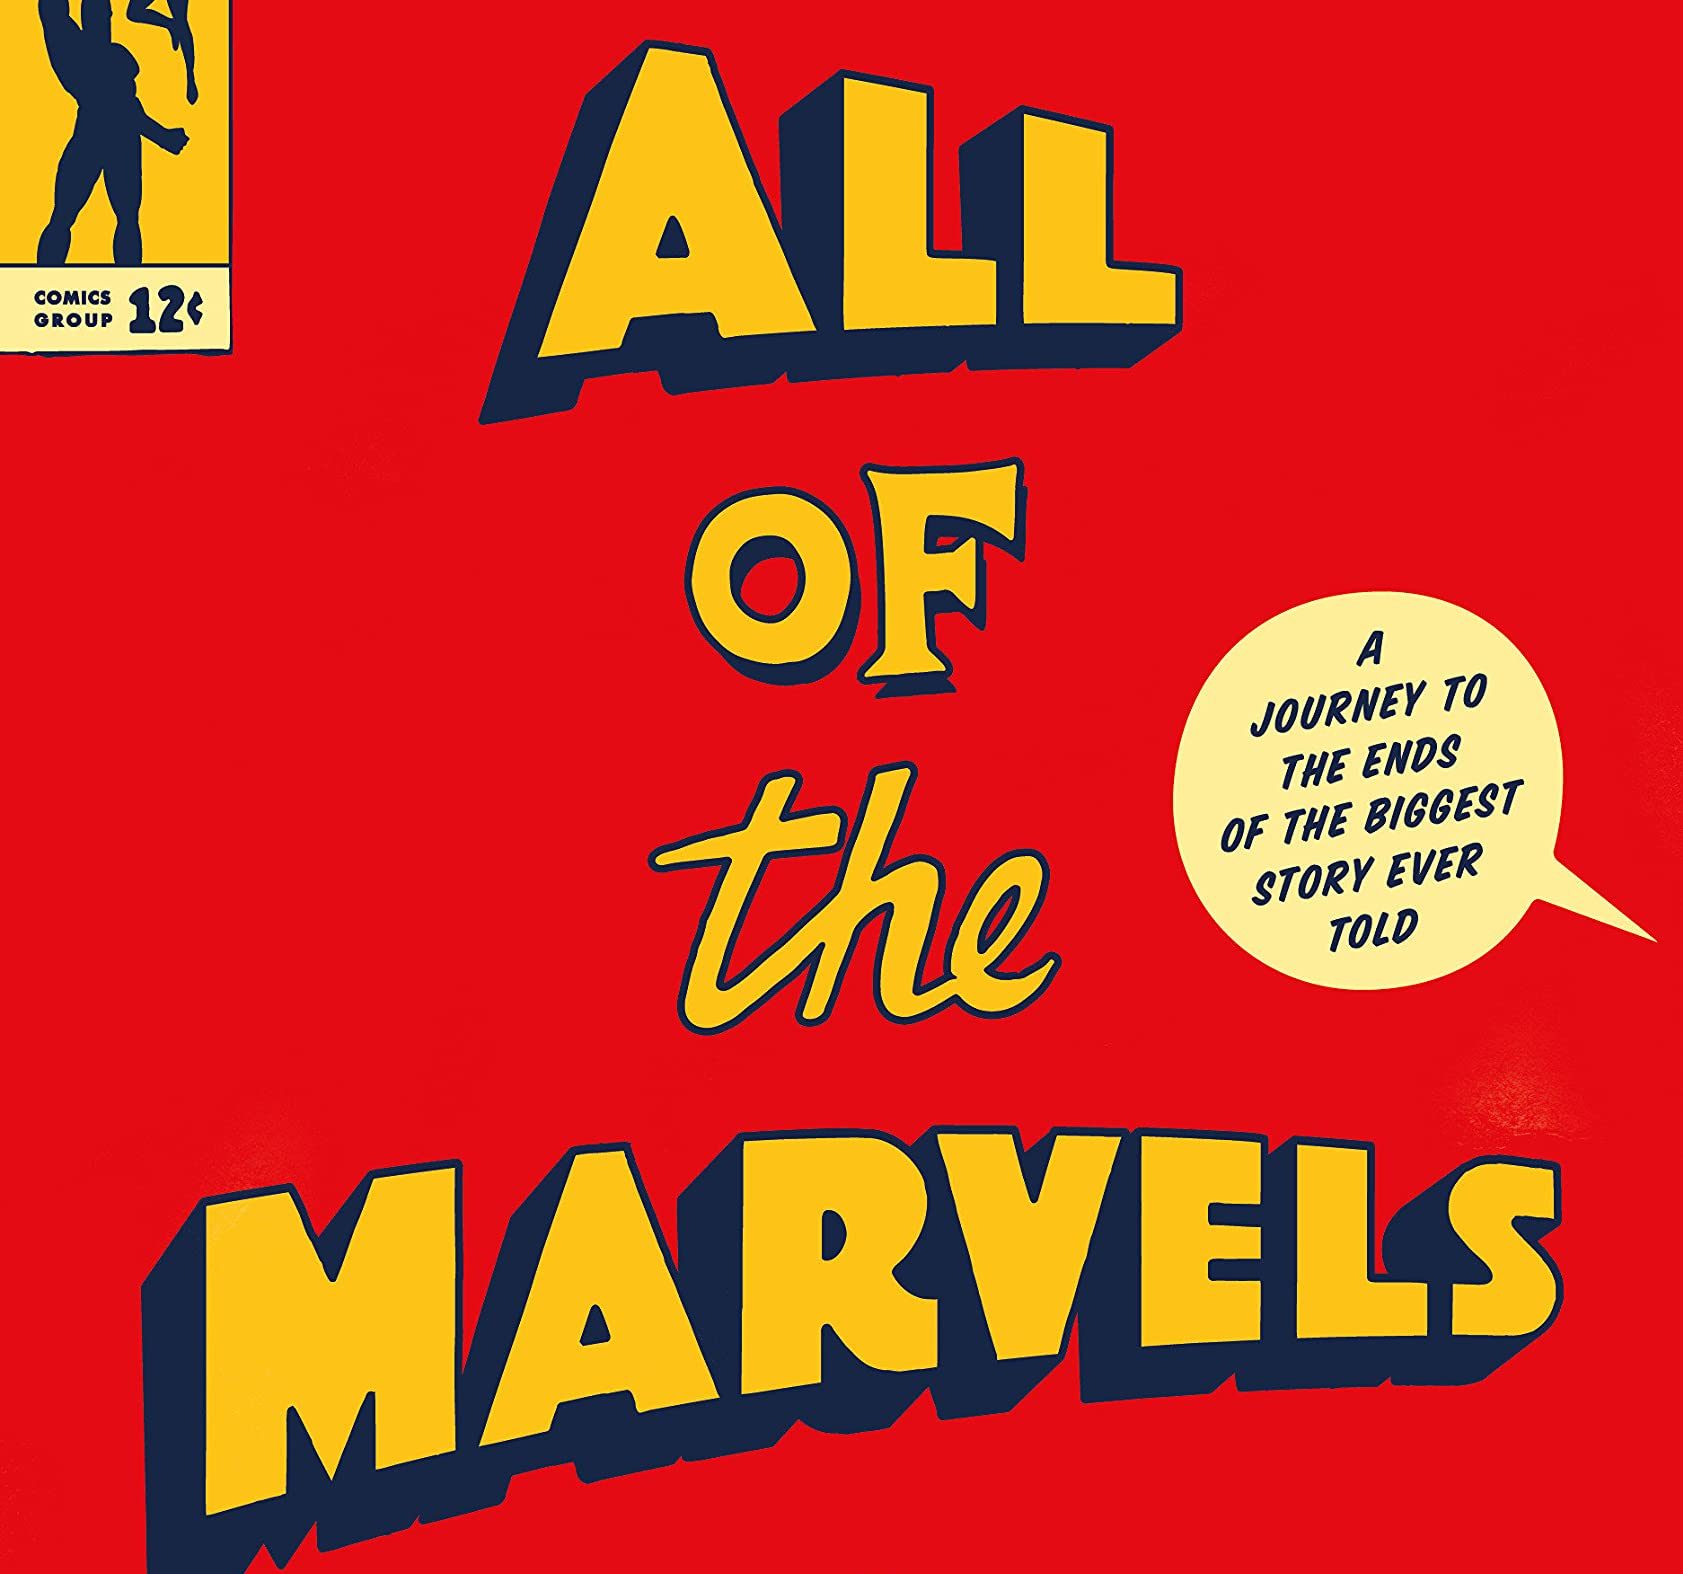 'All of the Marvels' is a witty, masterful tour of the Marvel Comics canon